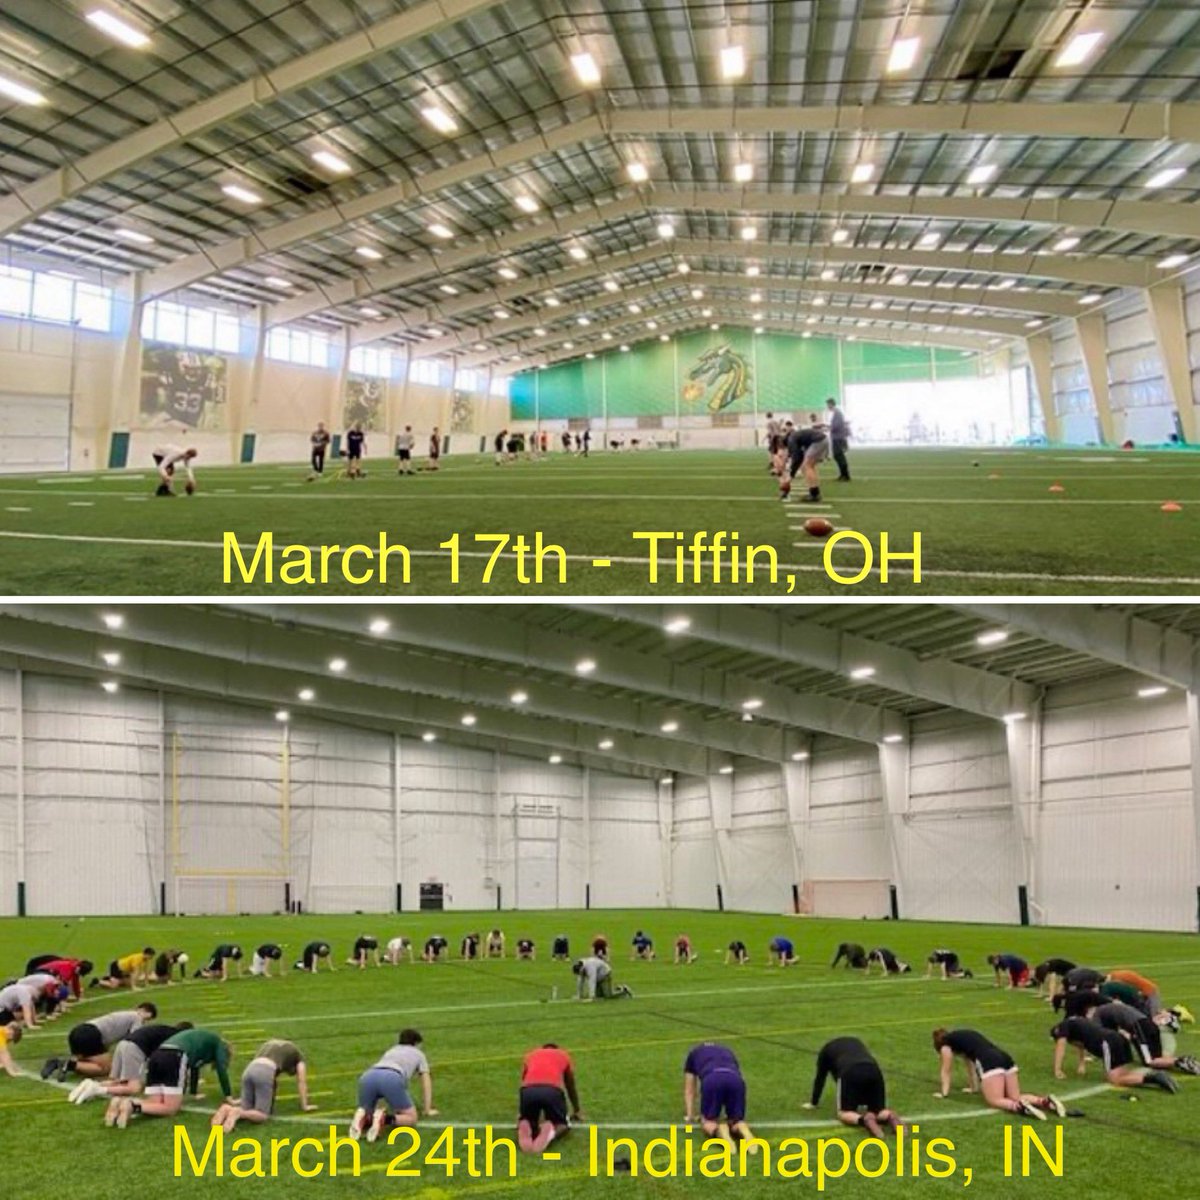 Last 2 winter kicking camps coming up. Join us if you can #thekickingcoach #kickingcamps #ohiokickingcamp #indianakickingcamp #kickingcoach